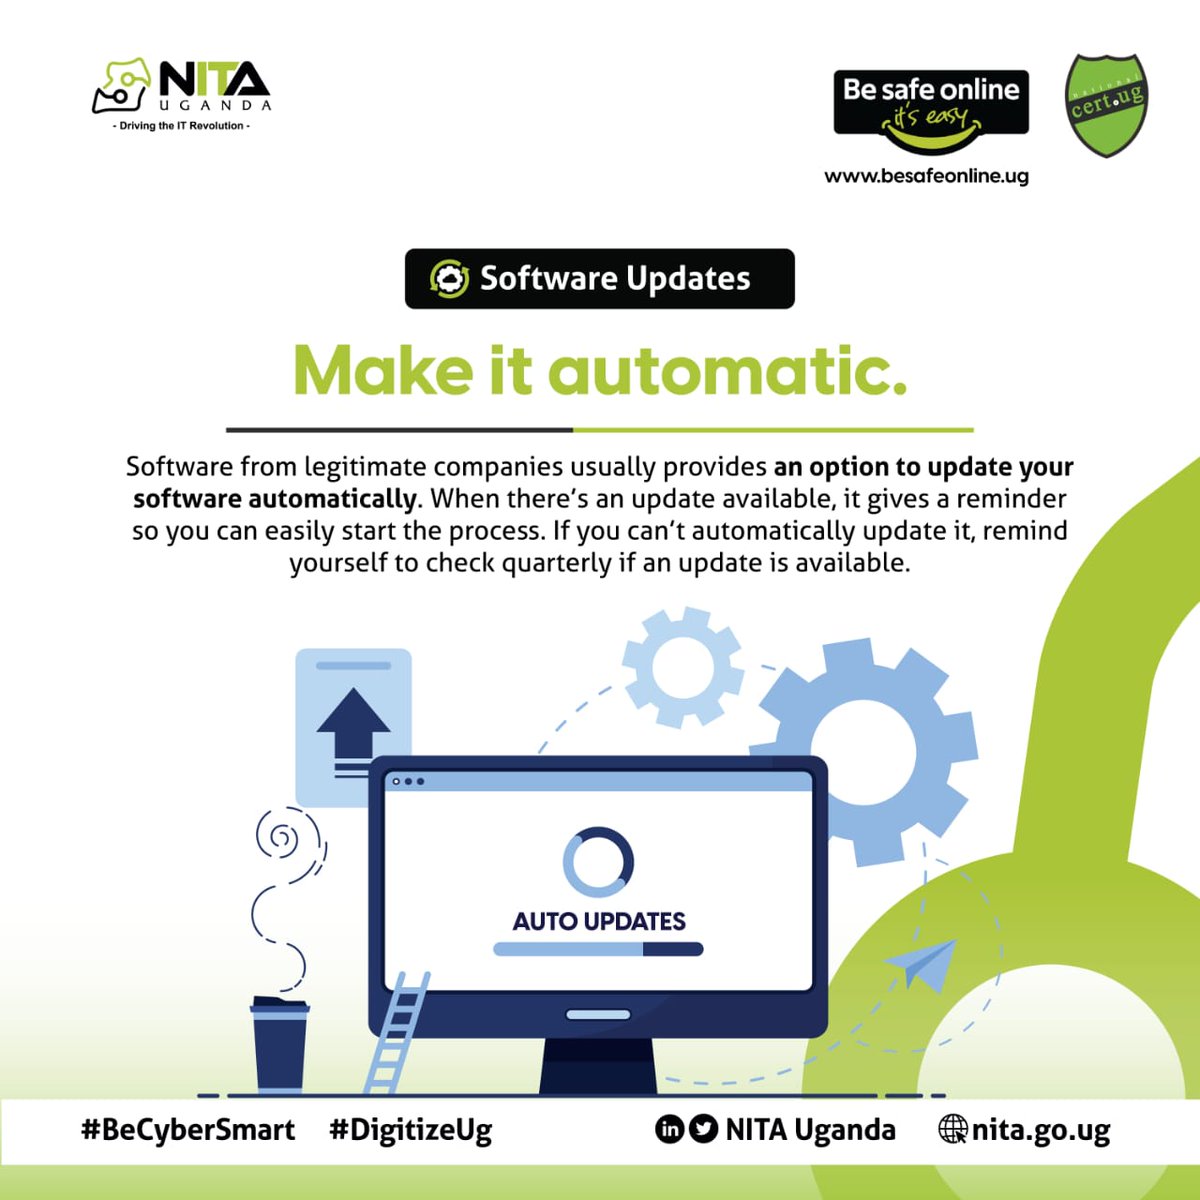 #CybersecurityAwarenessMonth Let's make software updates automatic to boost our digital defenses! It gives a reminder so you can easily start the process. #BeCyberSmart